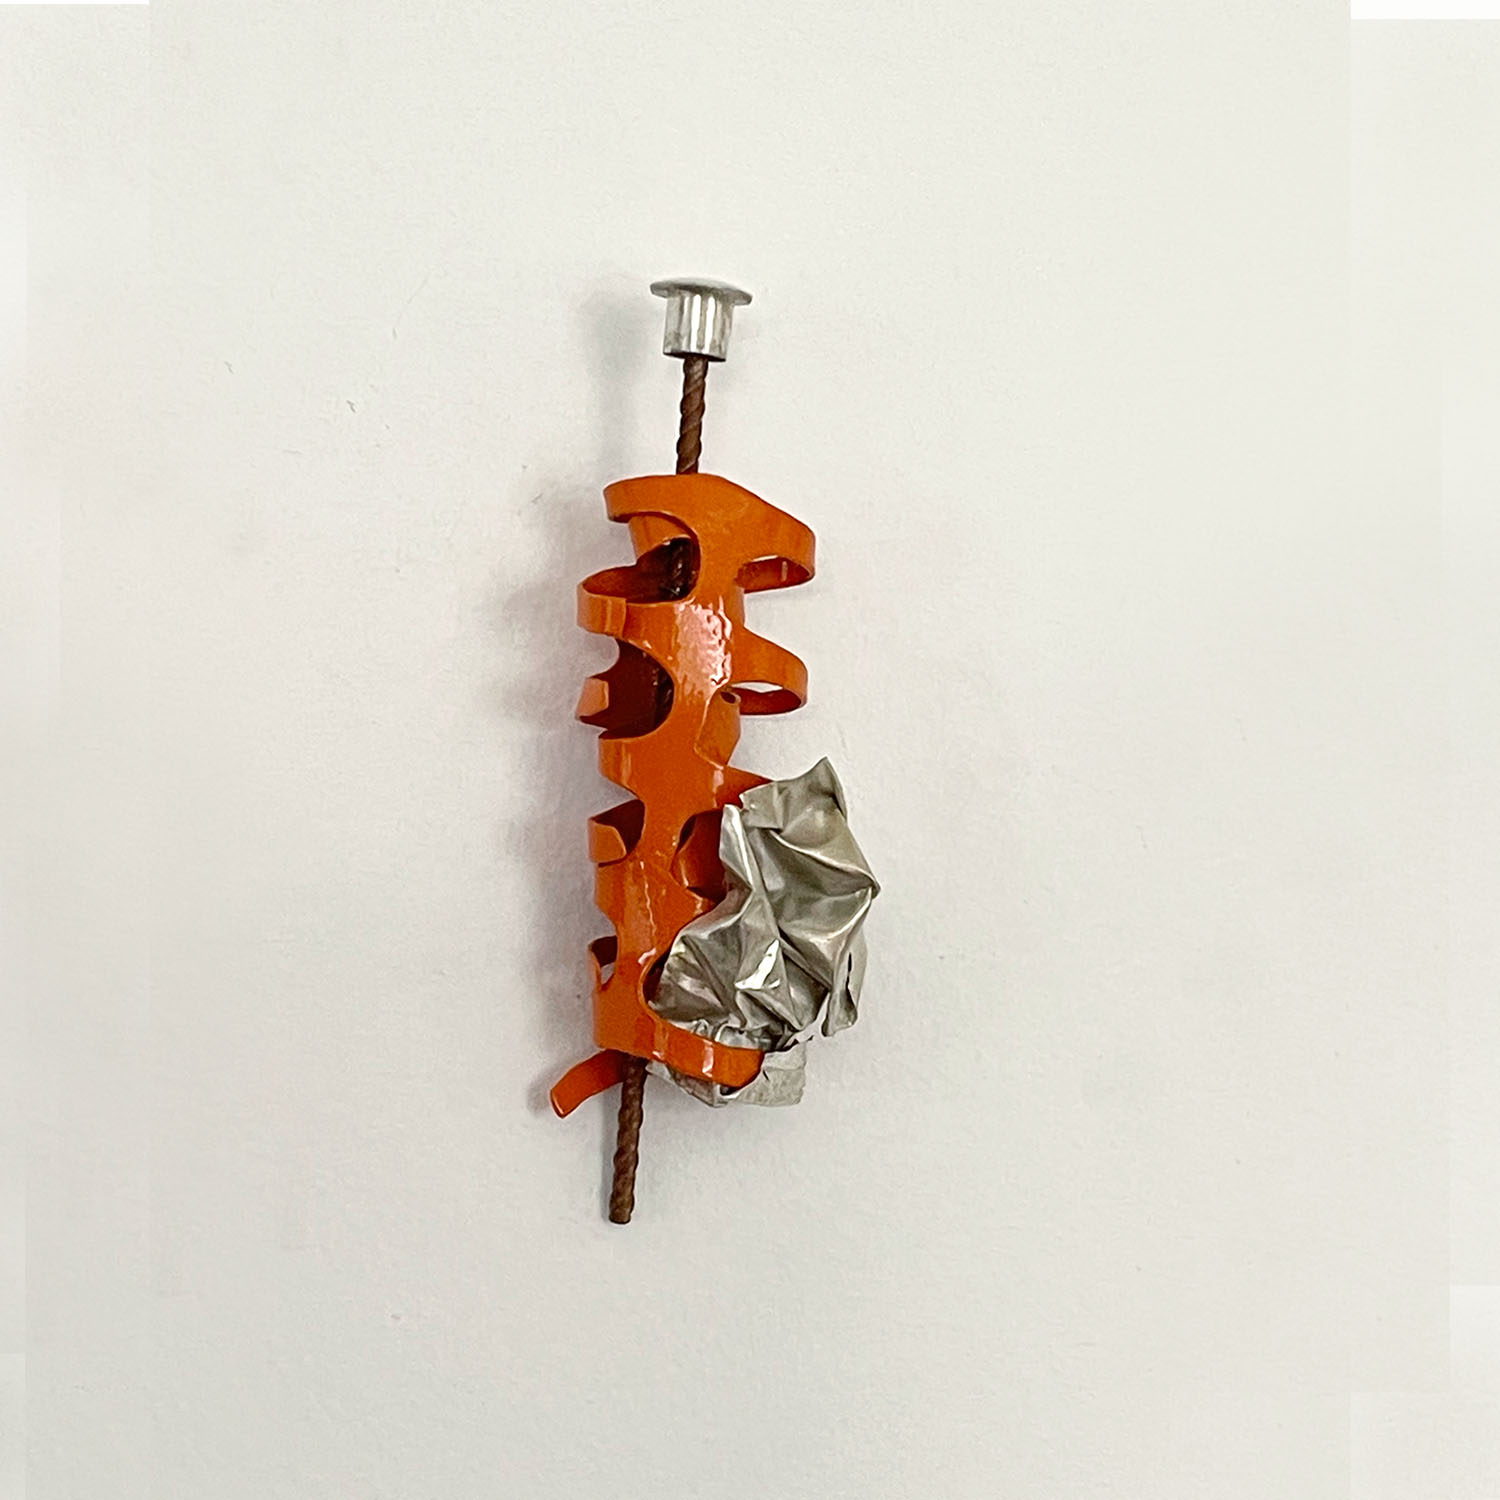 construction jewelry stuck pin by Natalie Macellaio